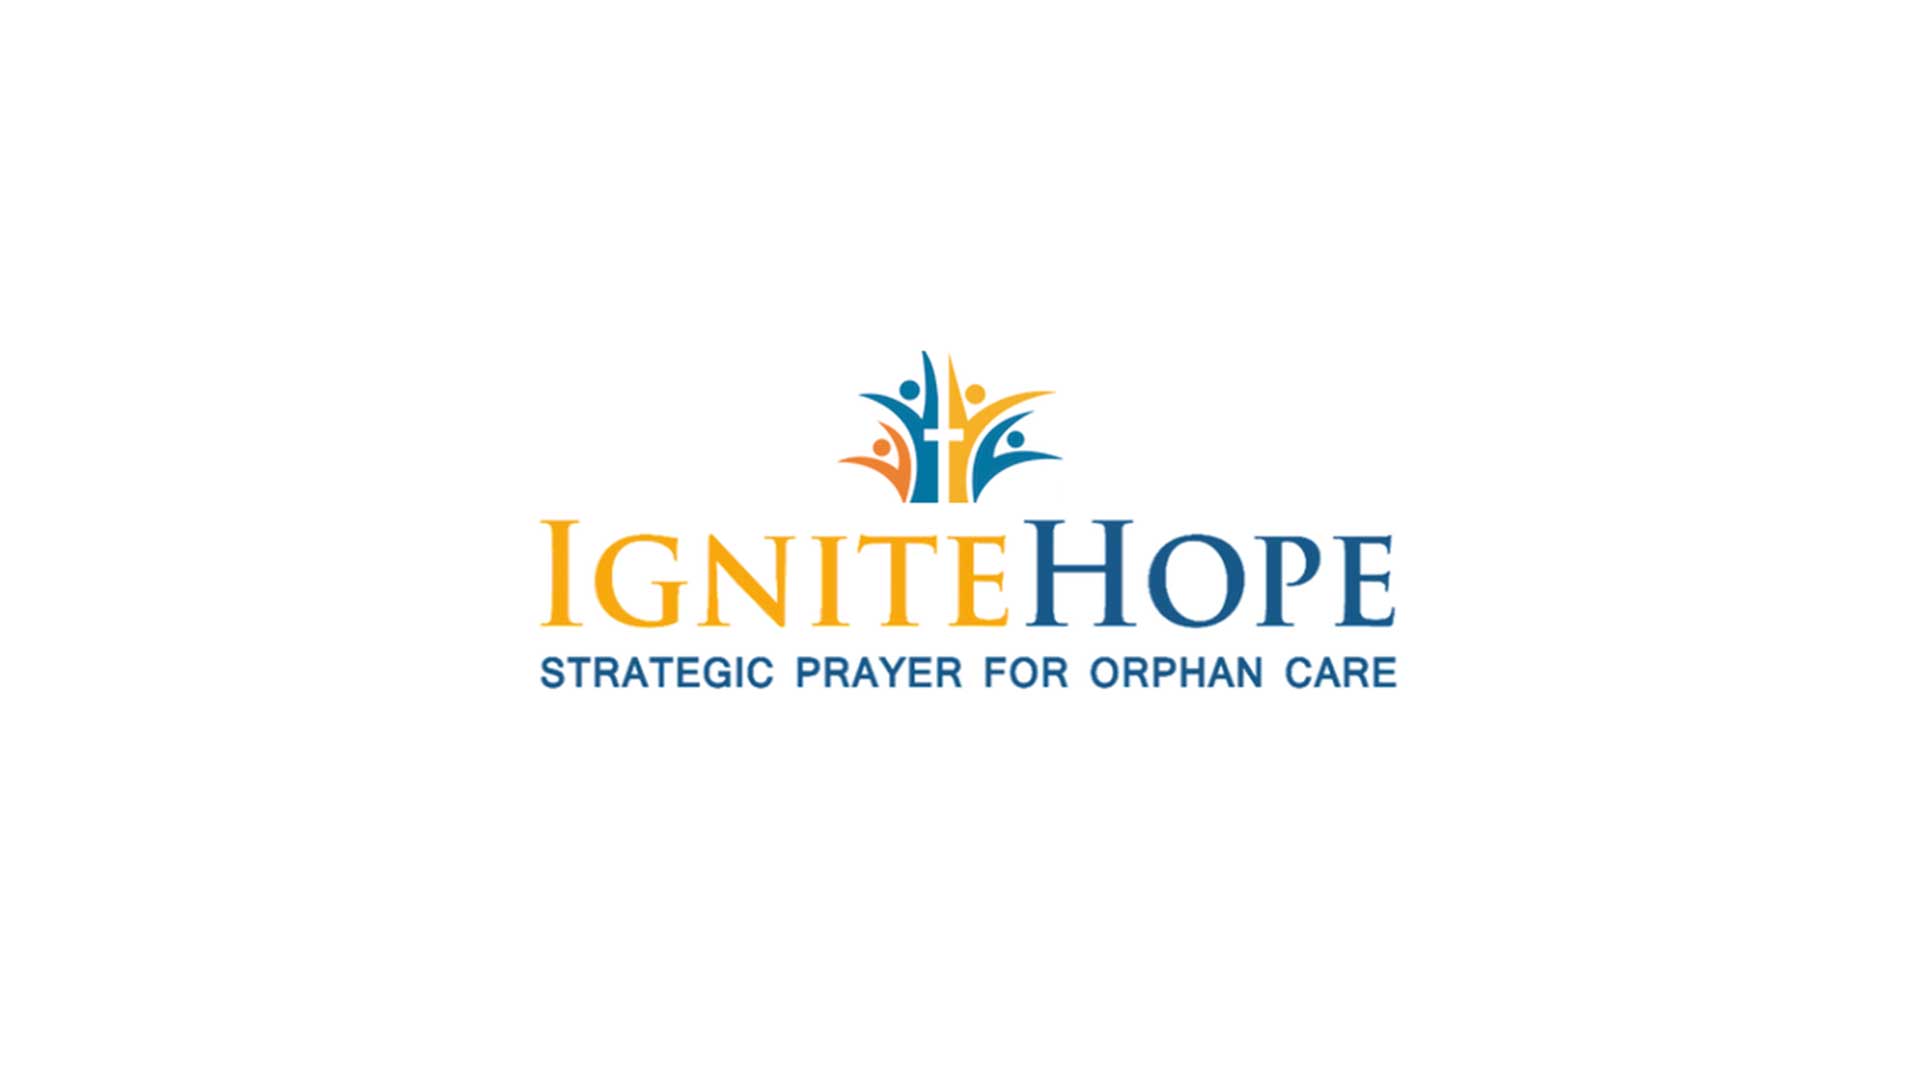 Ignite Hope Adoption and Fostering Ministry Slate828 Productions